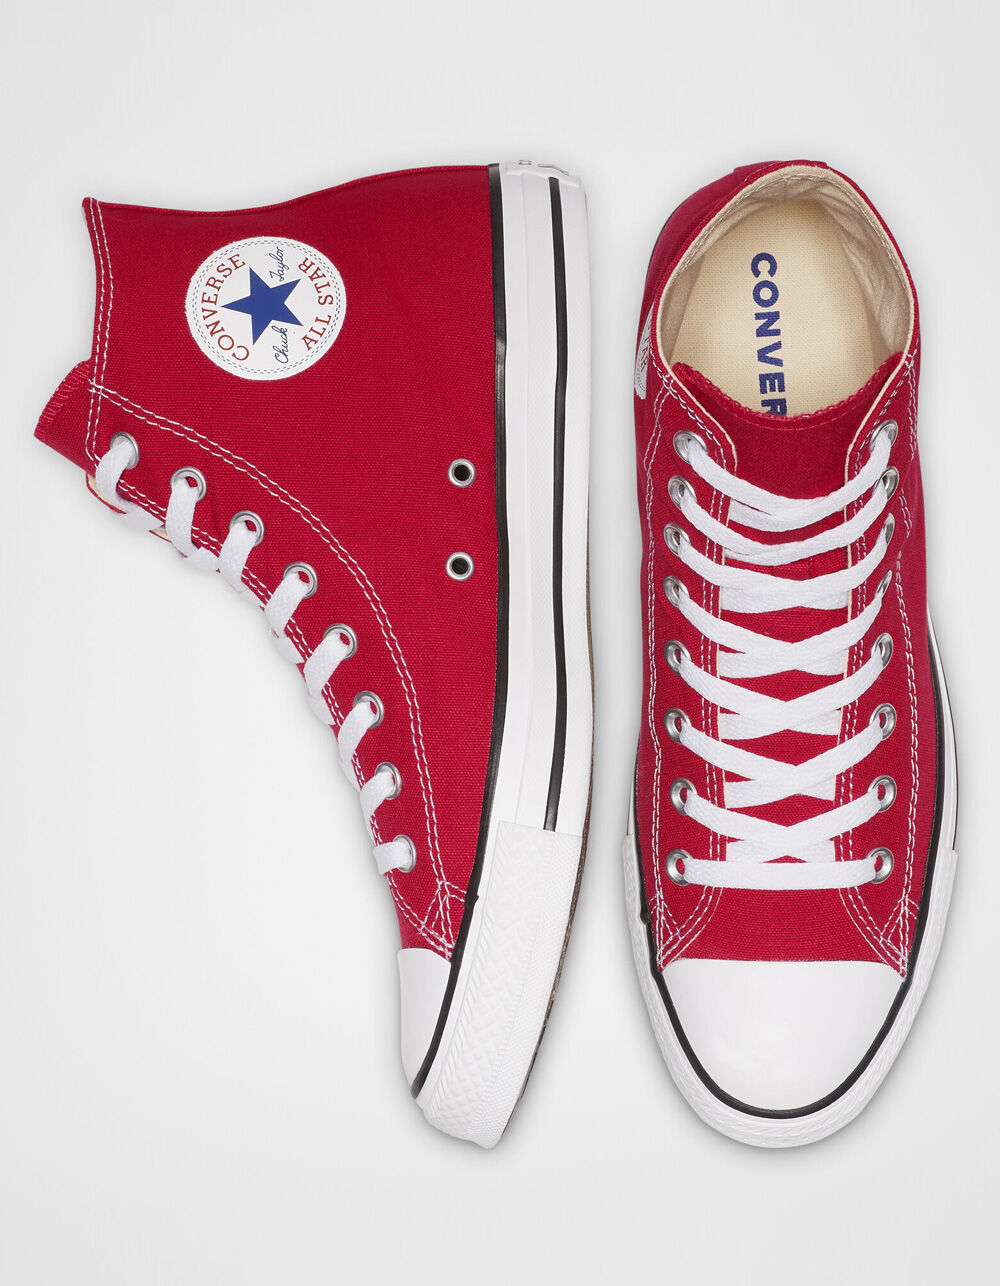 CONVERSE Chuck Taylor All Star High Top Shoes - RED - 159471300